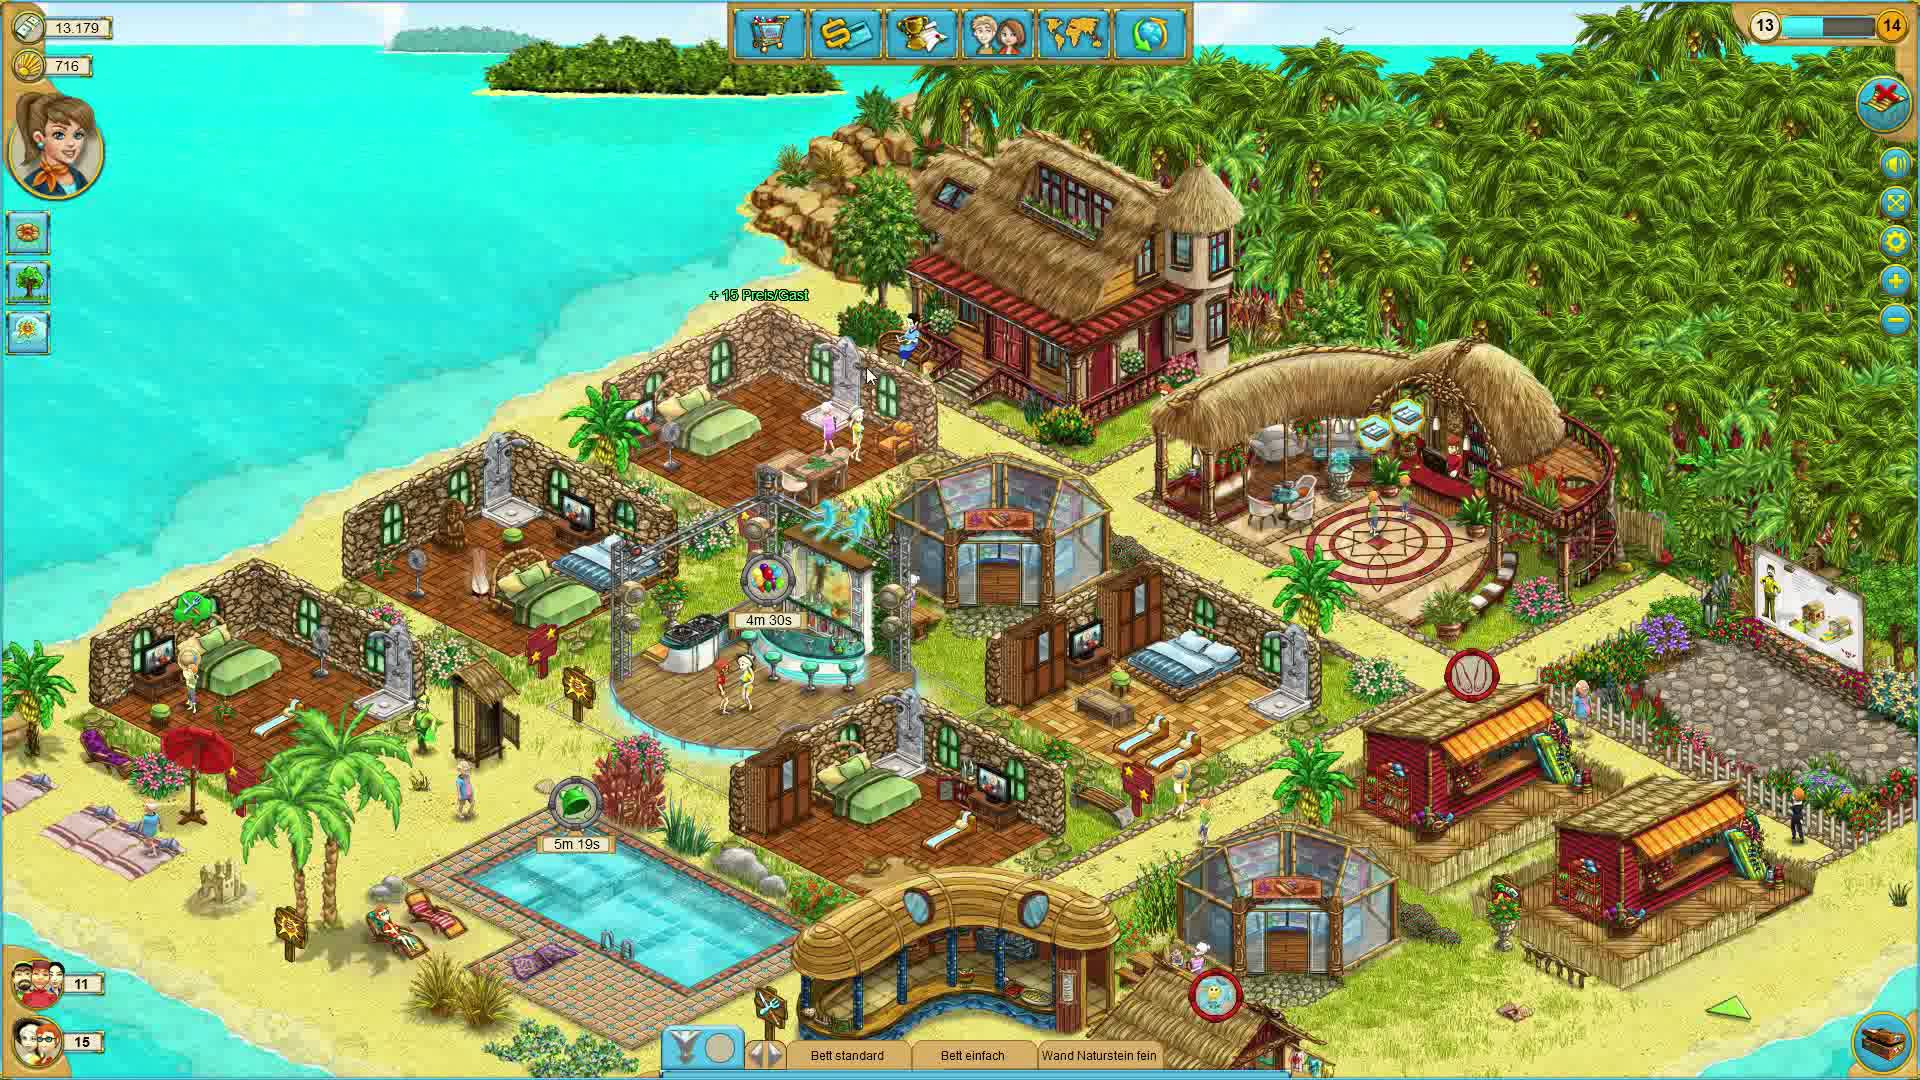 Beach resort in an island with swimming pool, cottages, hotels and other buildings.